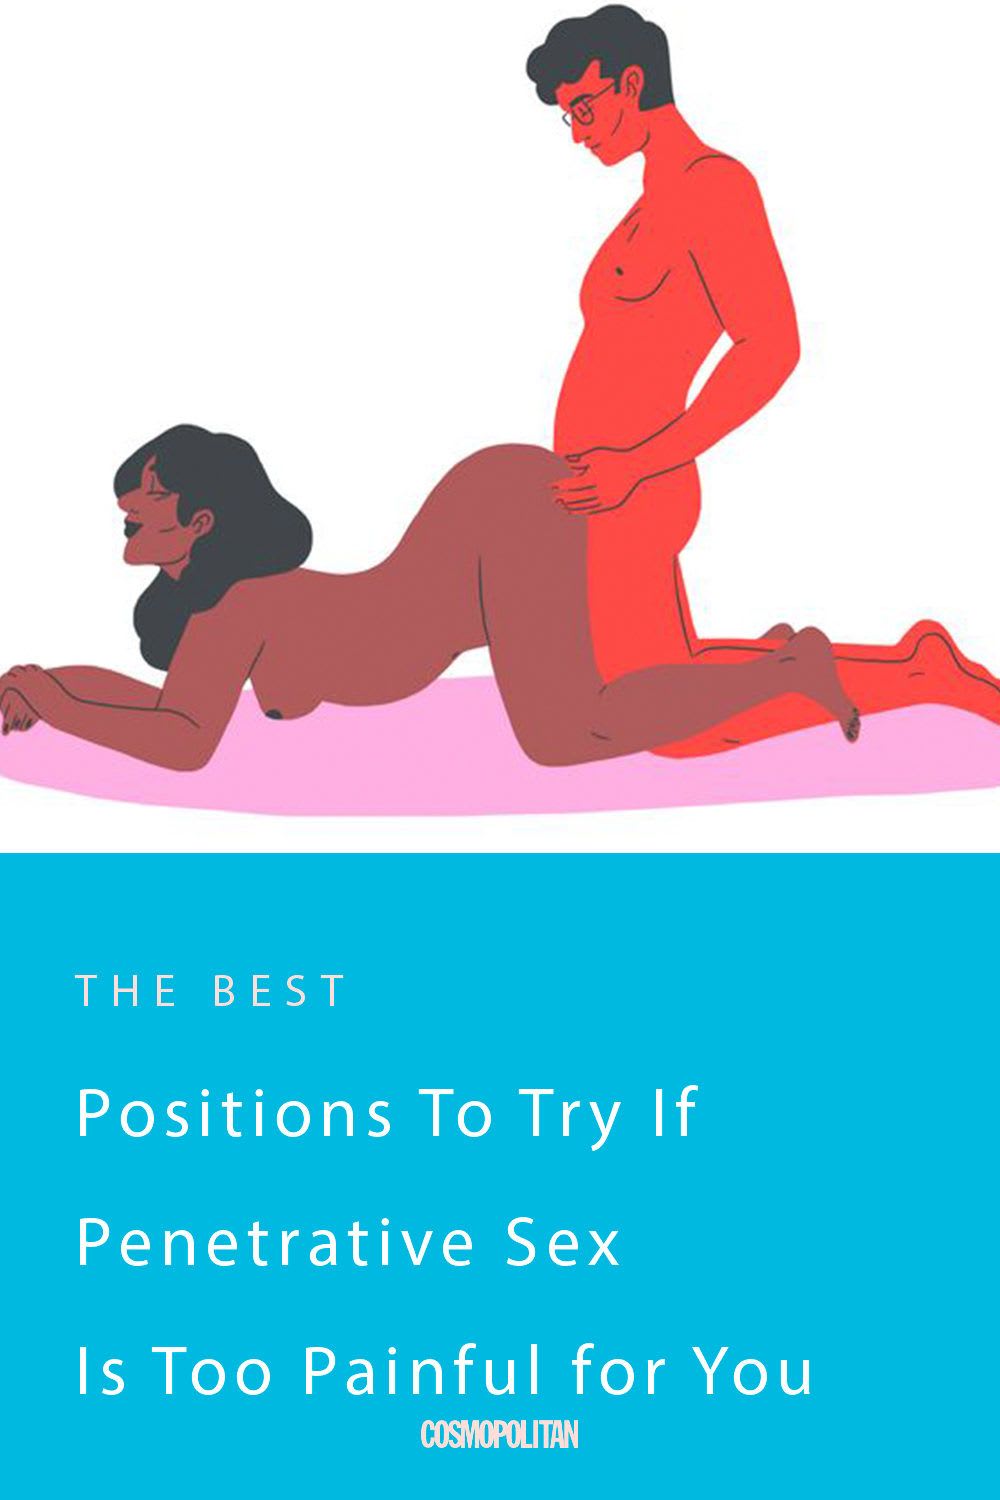 5 Positions to Try if Penetrative Sex Is Painful for You